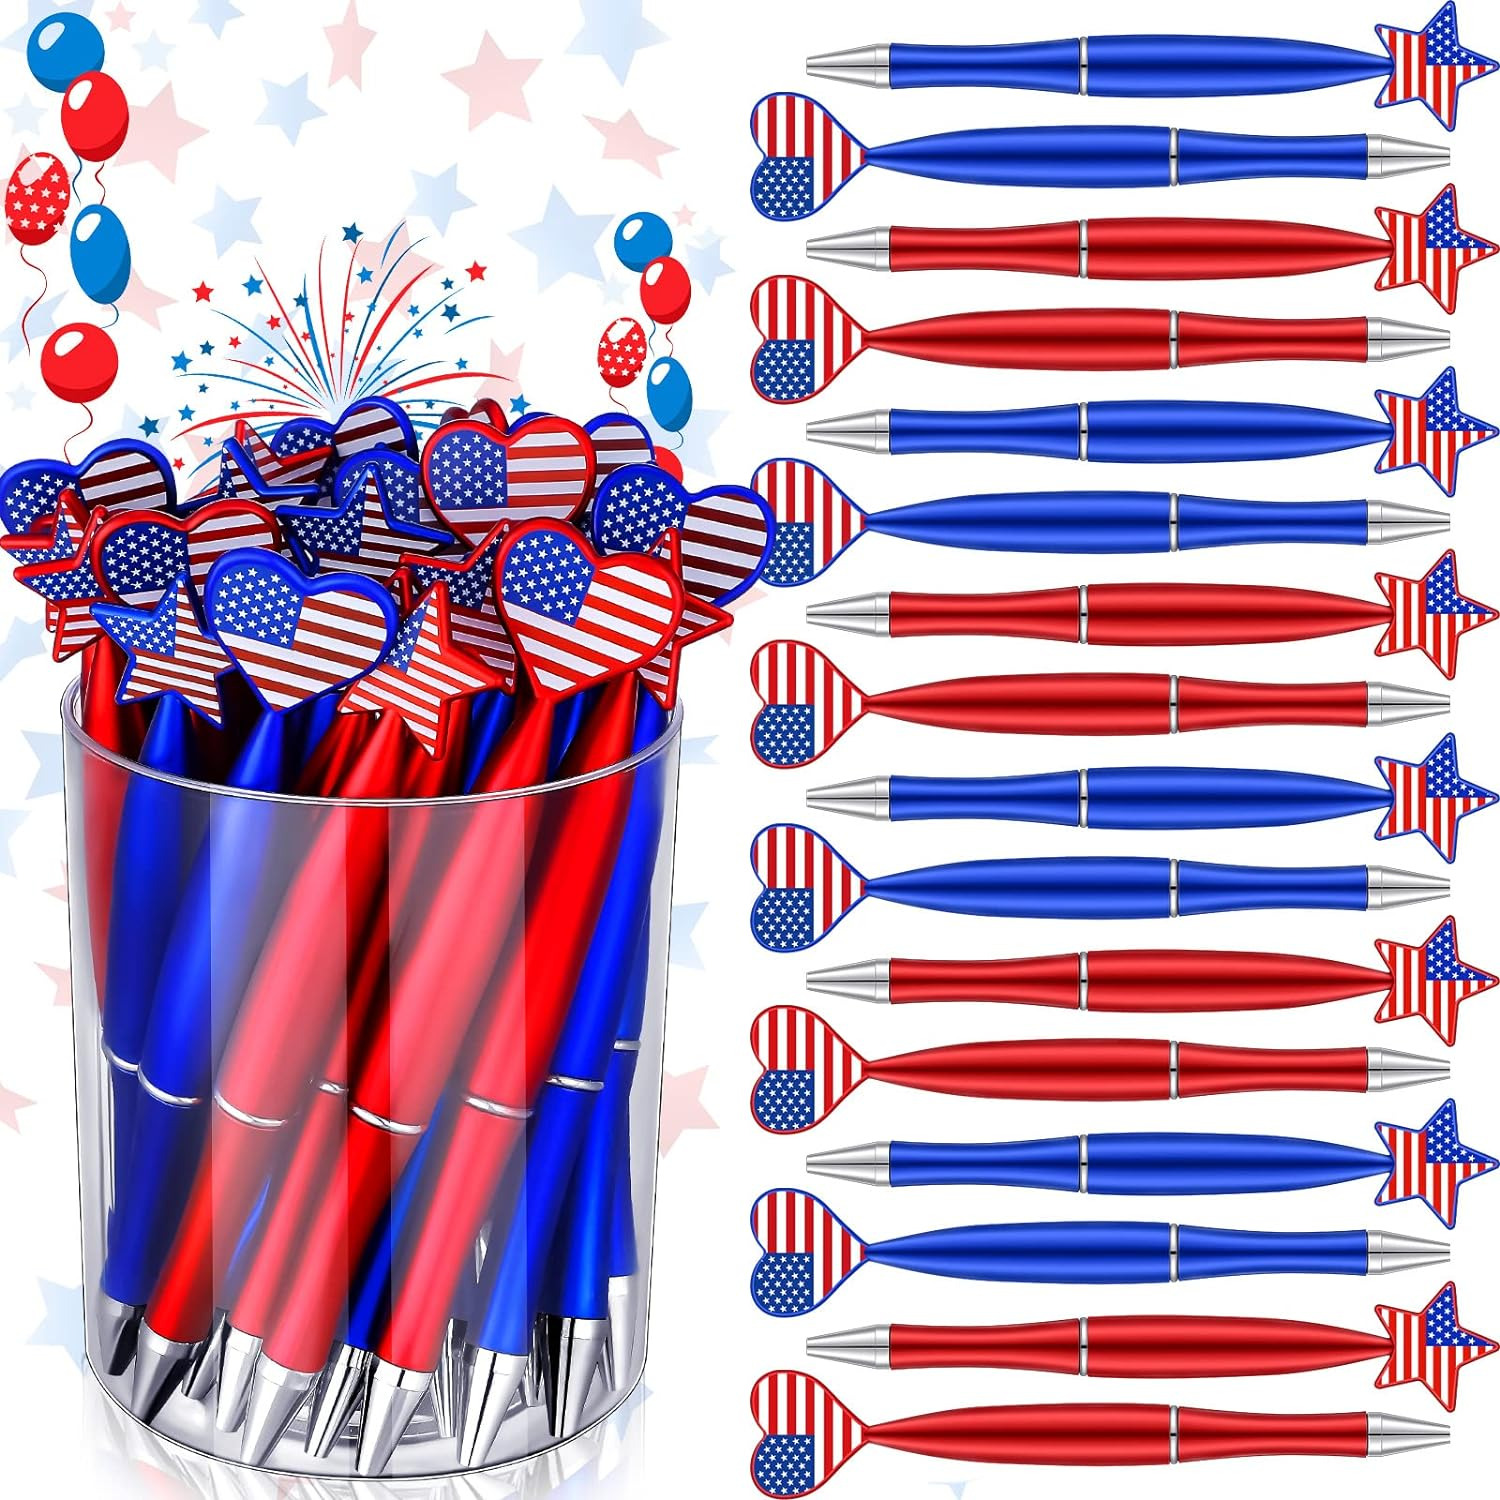 48 Pieces American Flag Pens Independence Day Pens Patriotic Day Ballpoint Pens 